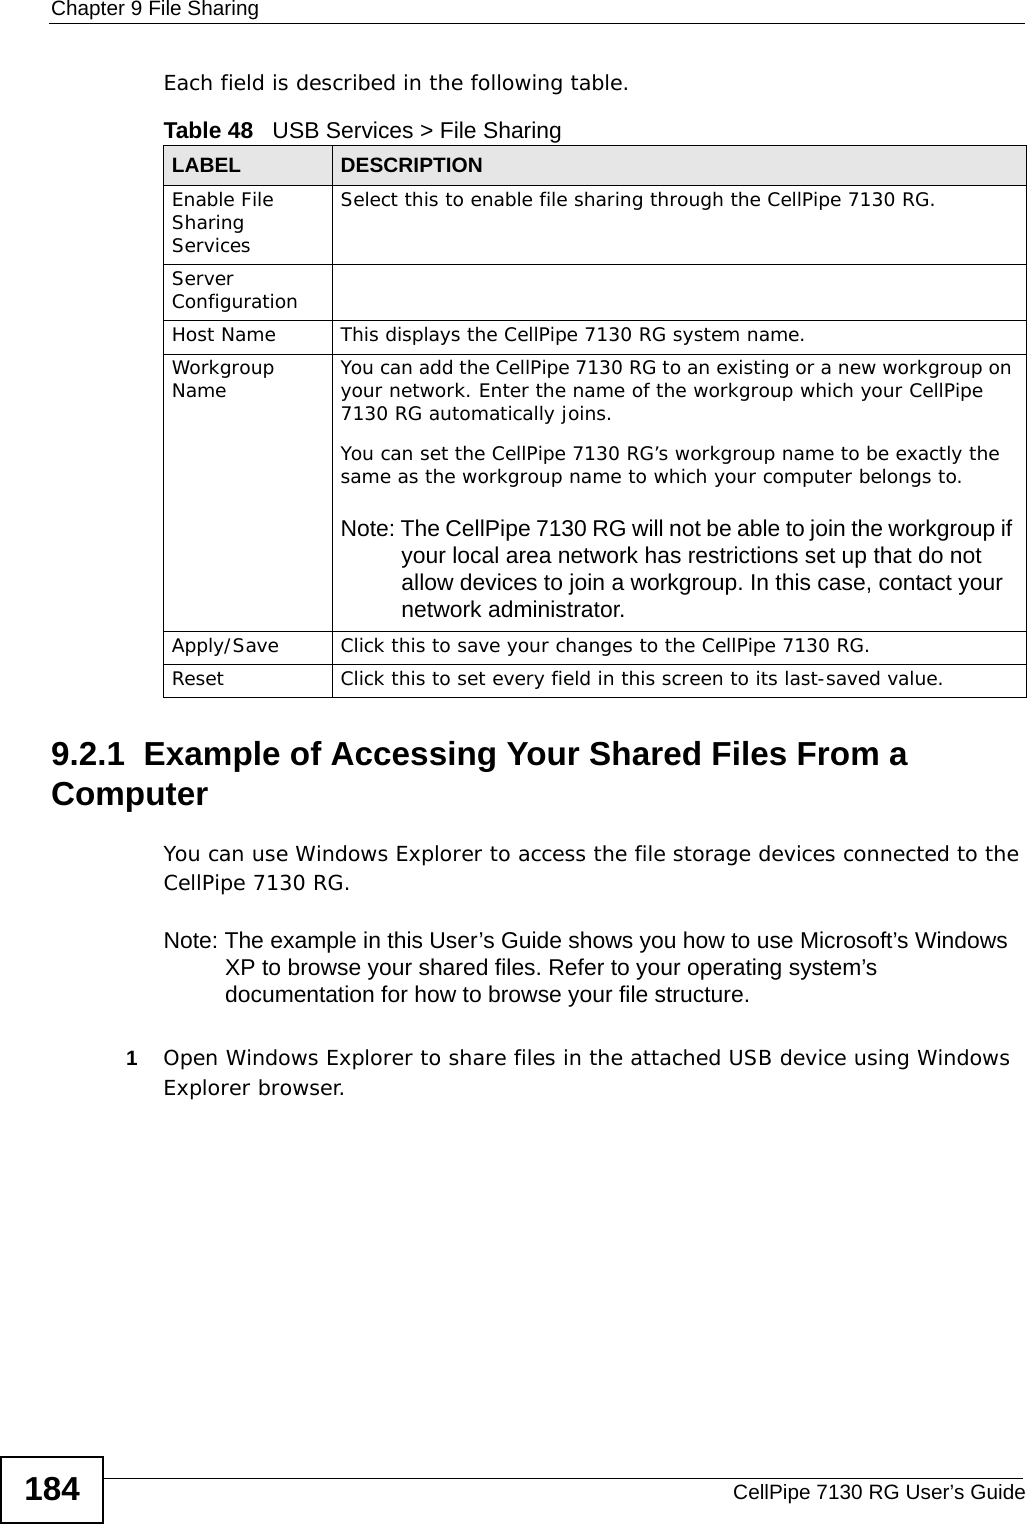 Chapter 9 File SharingCellPipe 7130 RG User’s Guide184Each field is described in the following table.9.2.1  Example of Accessing Your Shared Files From a Computer You can use Windows Explorer to access the file storage devices connected to the CellPipe 7130 RG.Note: The example in this User’s Guide shows you how to use Microsoft’s Windows XP to browse your shared files. Refer to your operating system’s documentation for how to browse your file structure. 1Open Windows Explorer to share files in the attached USB device using Windows Explorer browser.Table 48   USB Services &gt; File Sharing LABEL DESCRIPTIONEnable File Sharing ServicesSelect this to enable file sharing through the CellPipe 7130 RG. Server Configuration Host Name This displays the CellPipe 7130 RG system name.Workgroup Name You can add the CellPipe 7130 RG to an existing or a new workgroup on your network. Enter the name of the workgroup which your CellPipe 7130 RG automatically joins. You can set the CellPipe 7130 RG’s workgroup name to be exactly the same as the workgroup name to which your computer belongs to.Note: The CellPipe 7130 RG will not be able to join the workgroup if your local area network has restrictions set up that do not allow devices to join a workgroup. In this case, contact your network administrator.Apply/Save Click this to save your changes to the CellPipe 7130 RG.Reset Click this to set every field in this screen to its last-saved value.